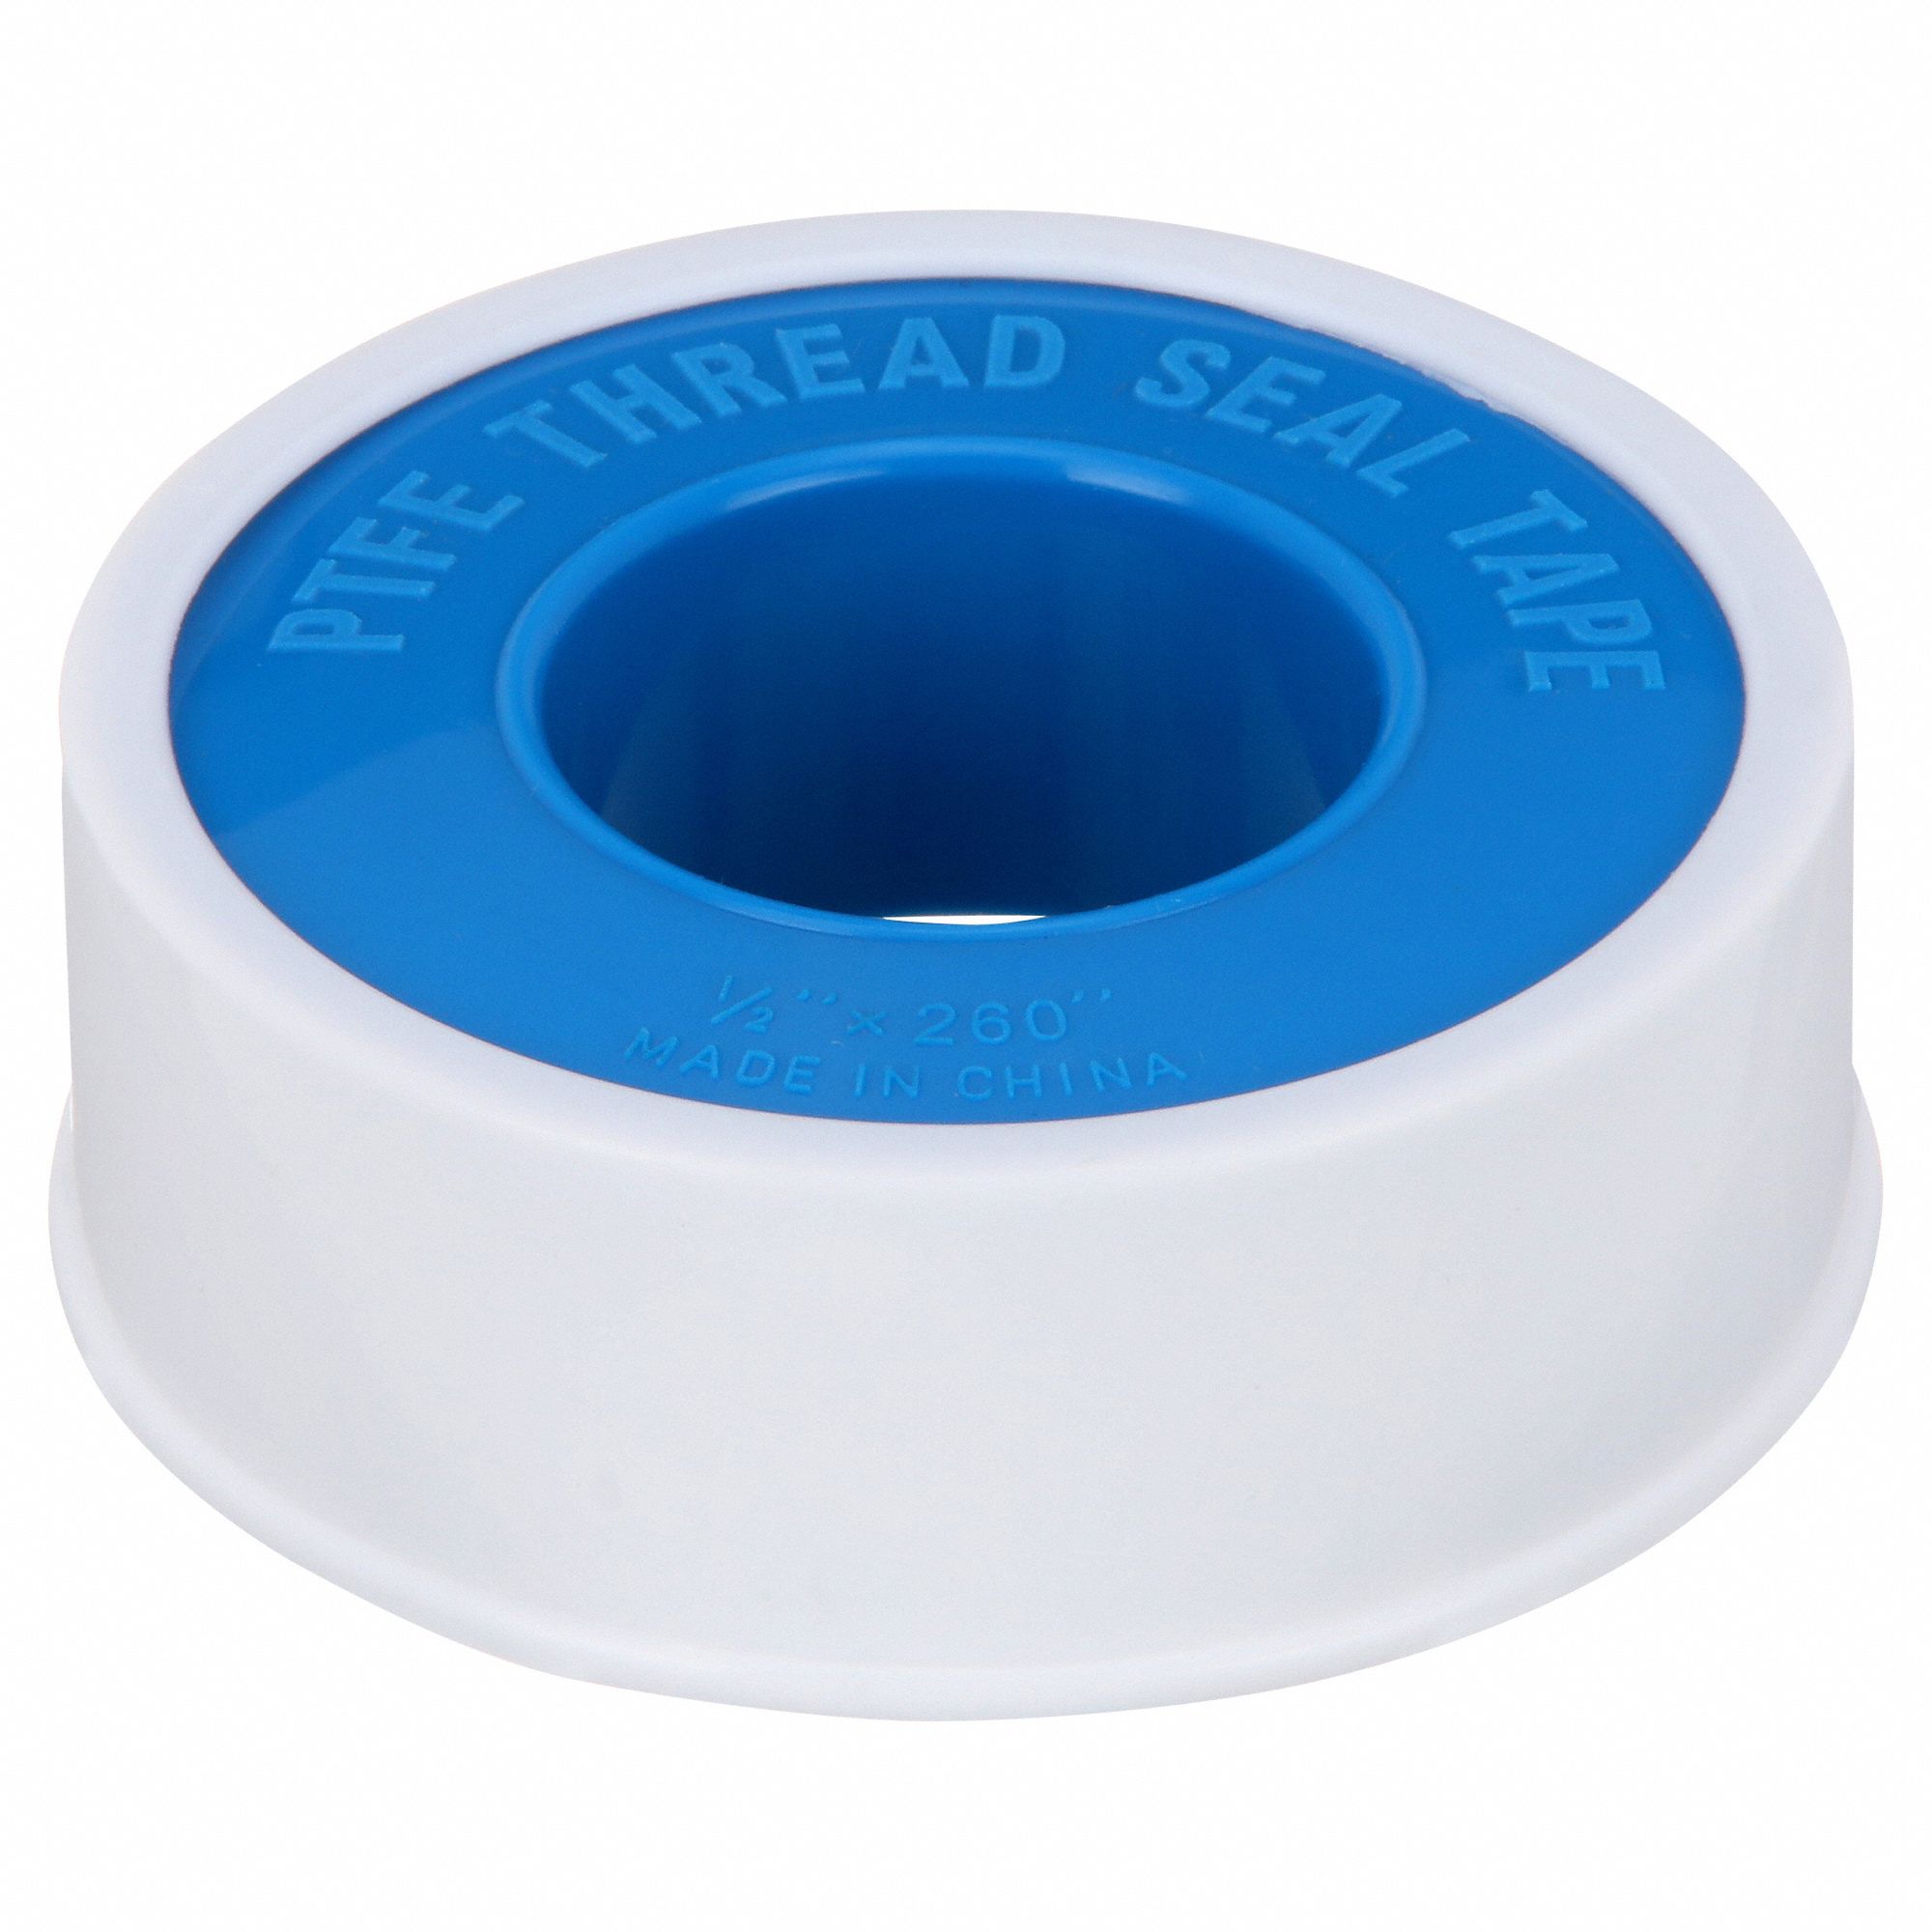 APPROVED VENDOR Thread Sealant Tape: Low Density, 1/2 in x 21 ft, White